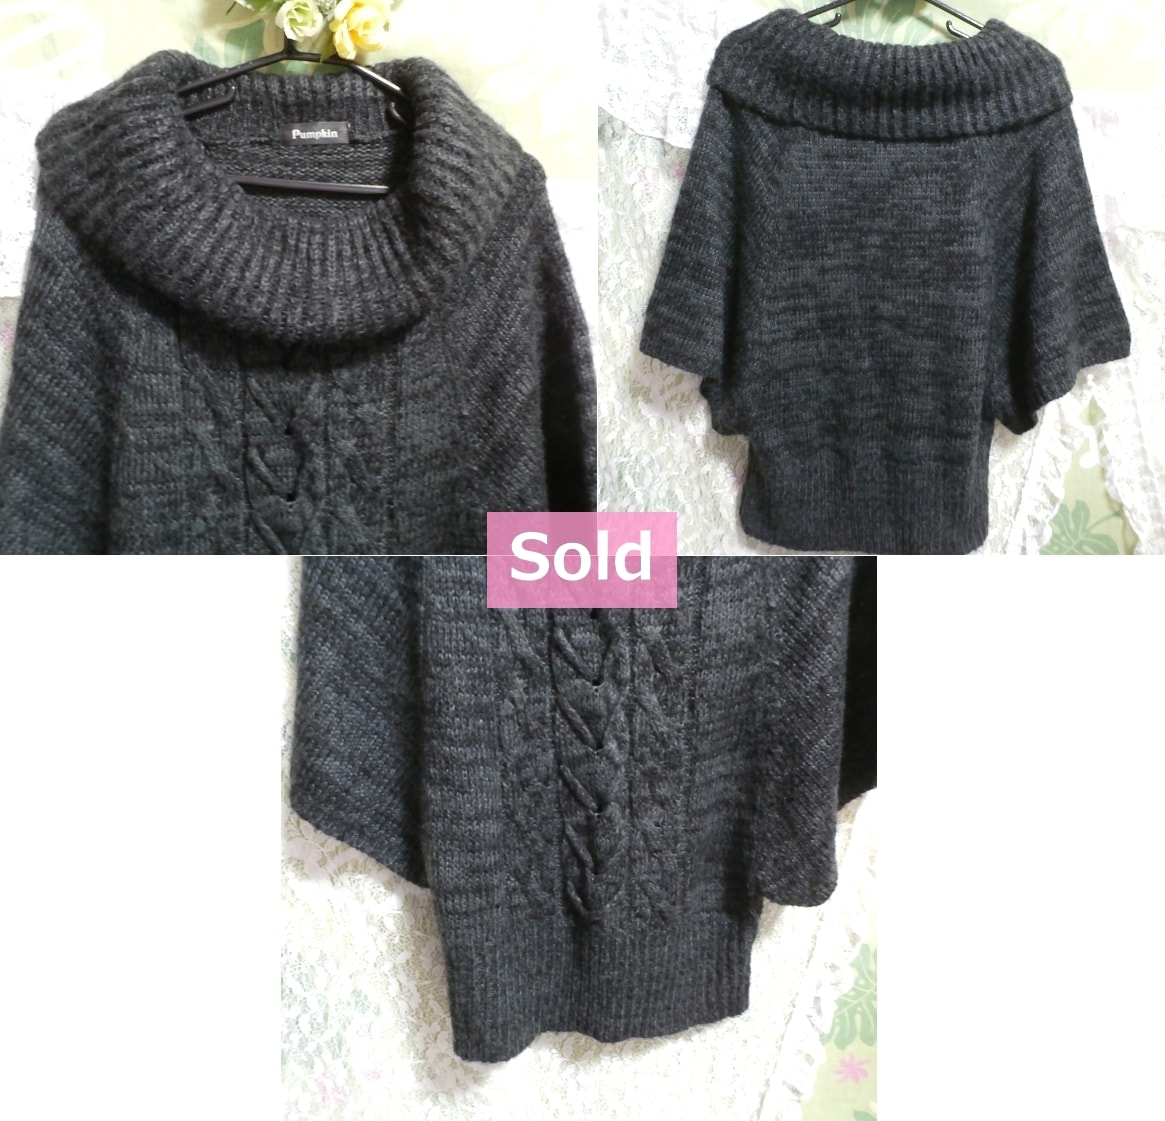 Poncho style hairy dark gray / sweater / knit / tops, knit, sweater & long sleeves & M size